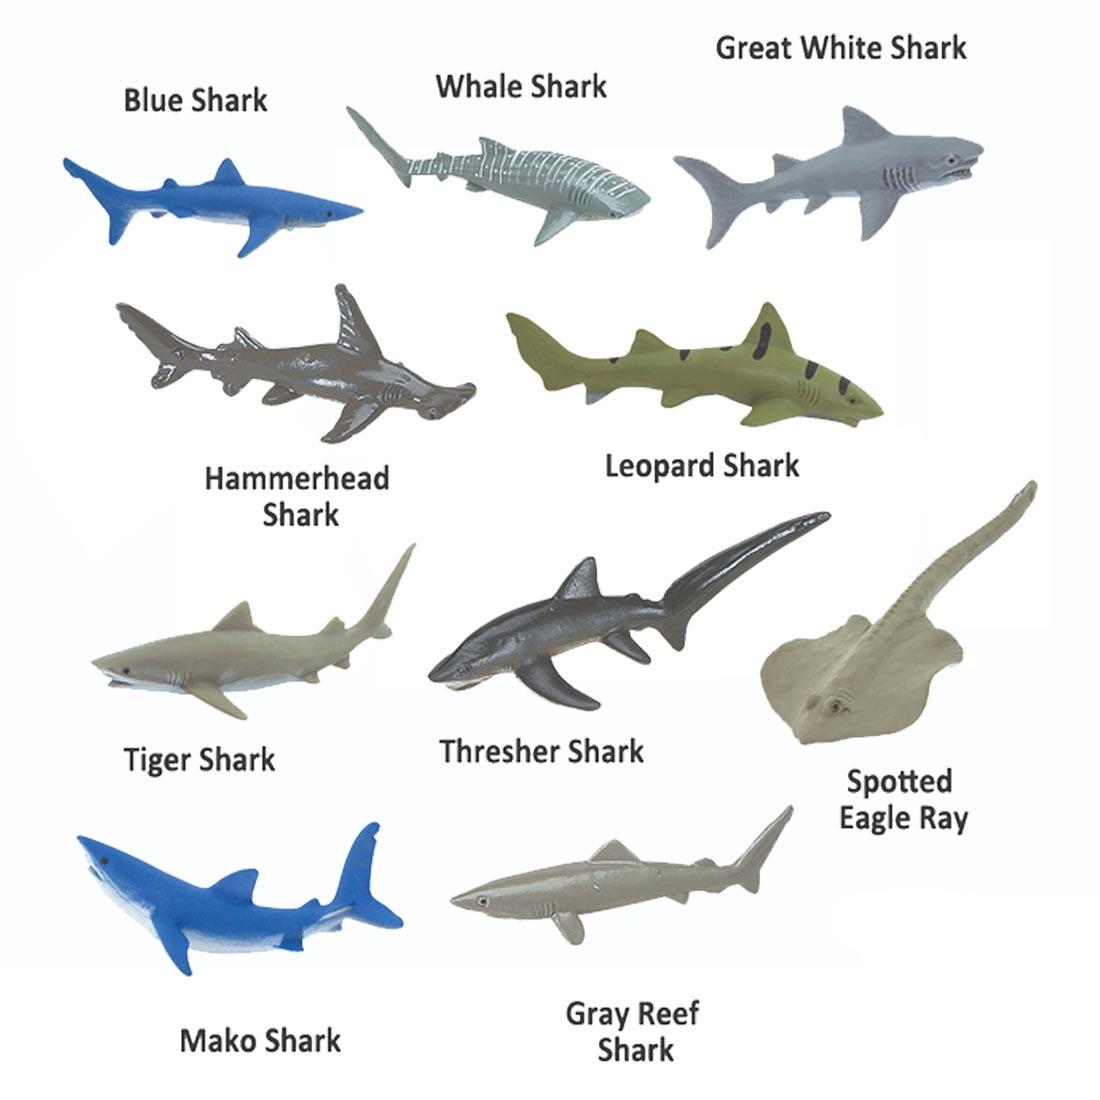 10 Shark Figurines labeled with their names: blue, whale, great white, hammerhead, leopard, tiger, thresher, mako, gray reef sharks and spotted eagle ray